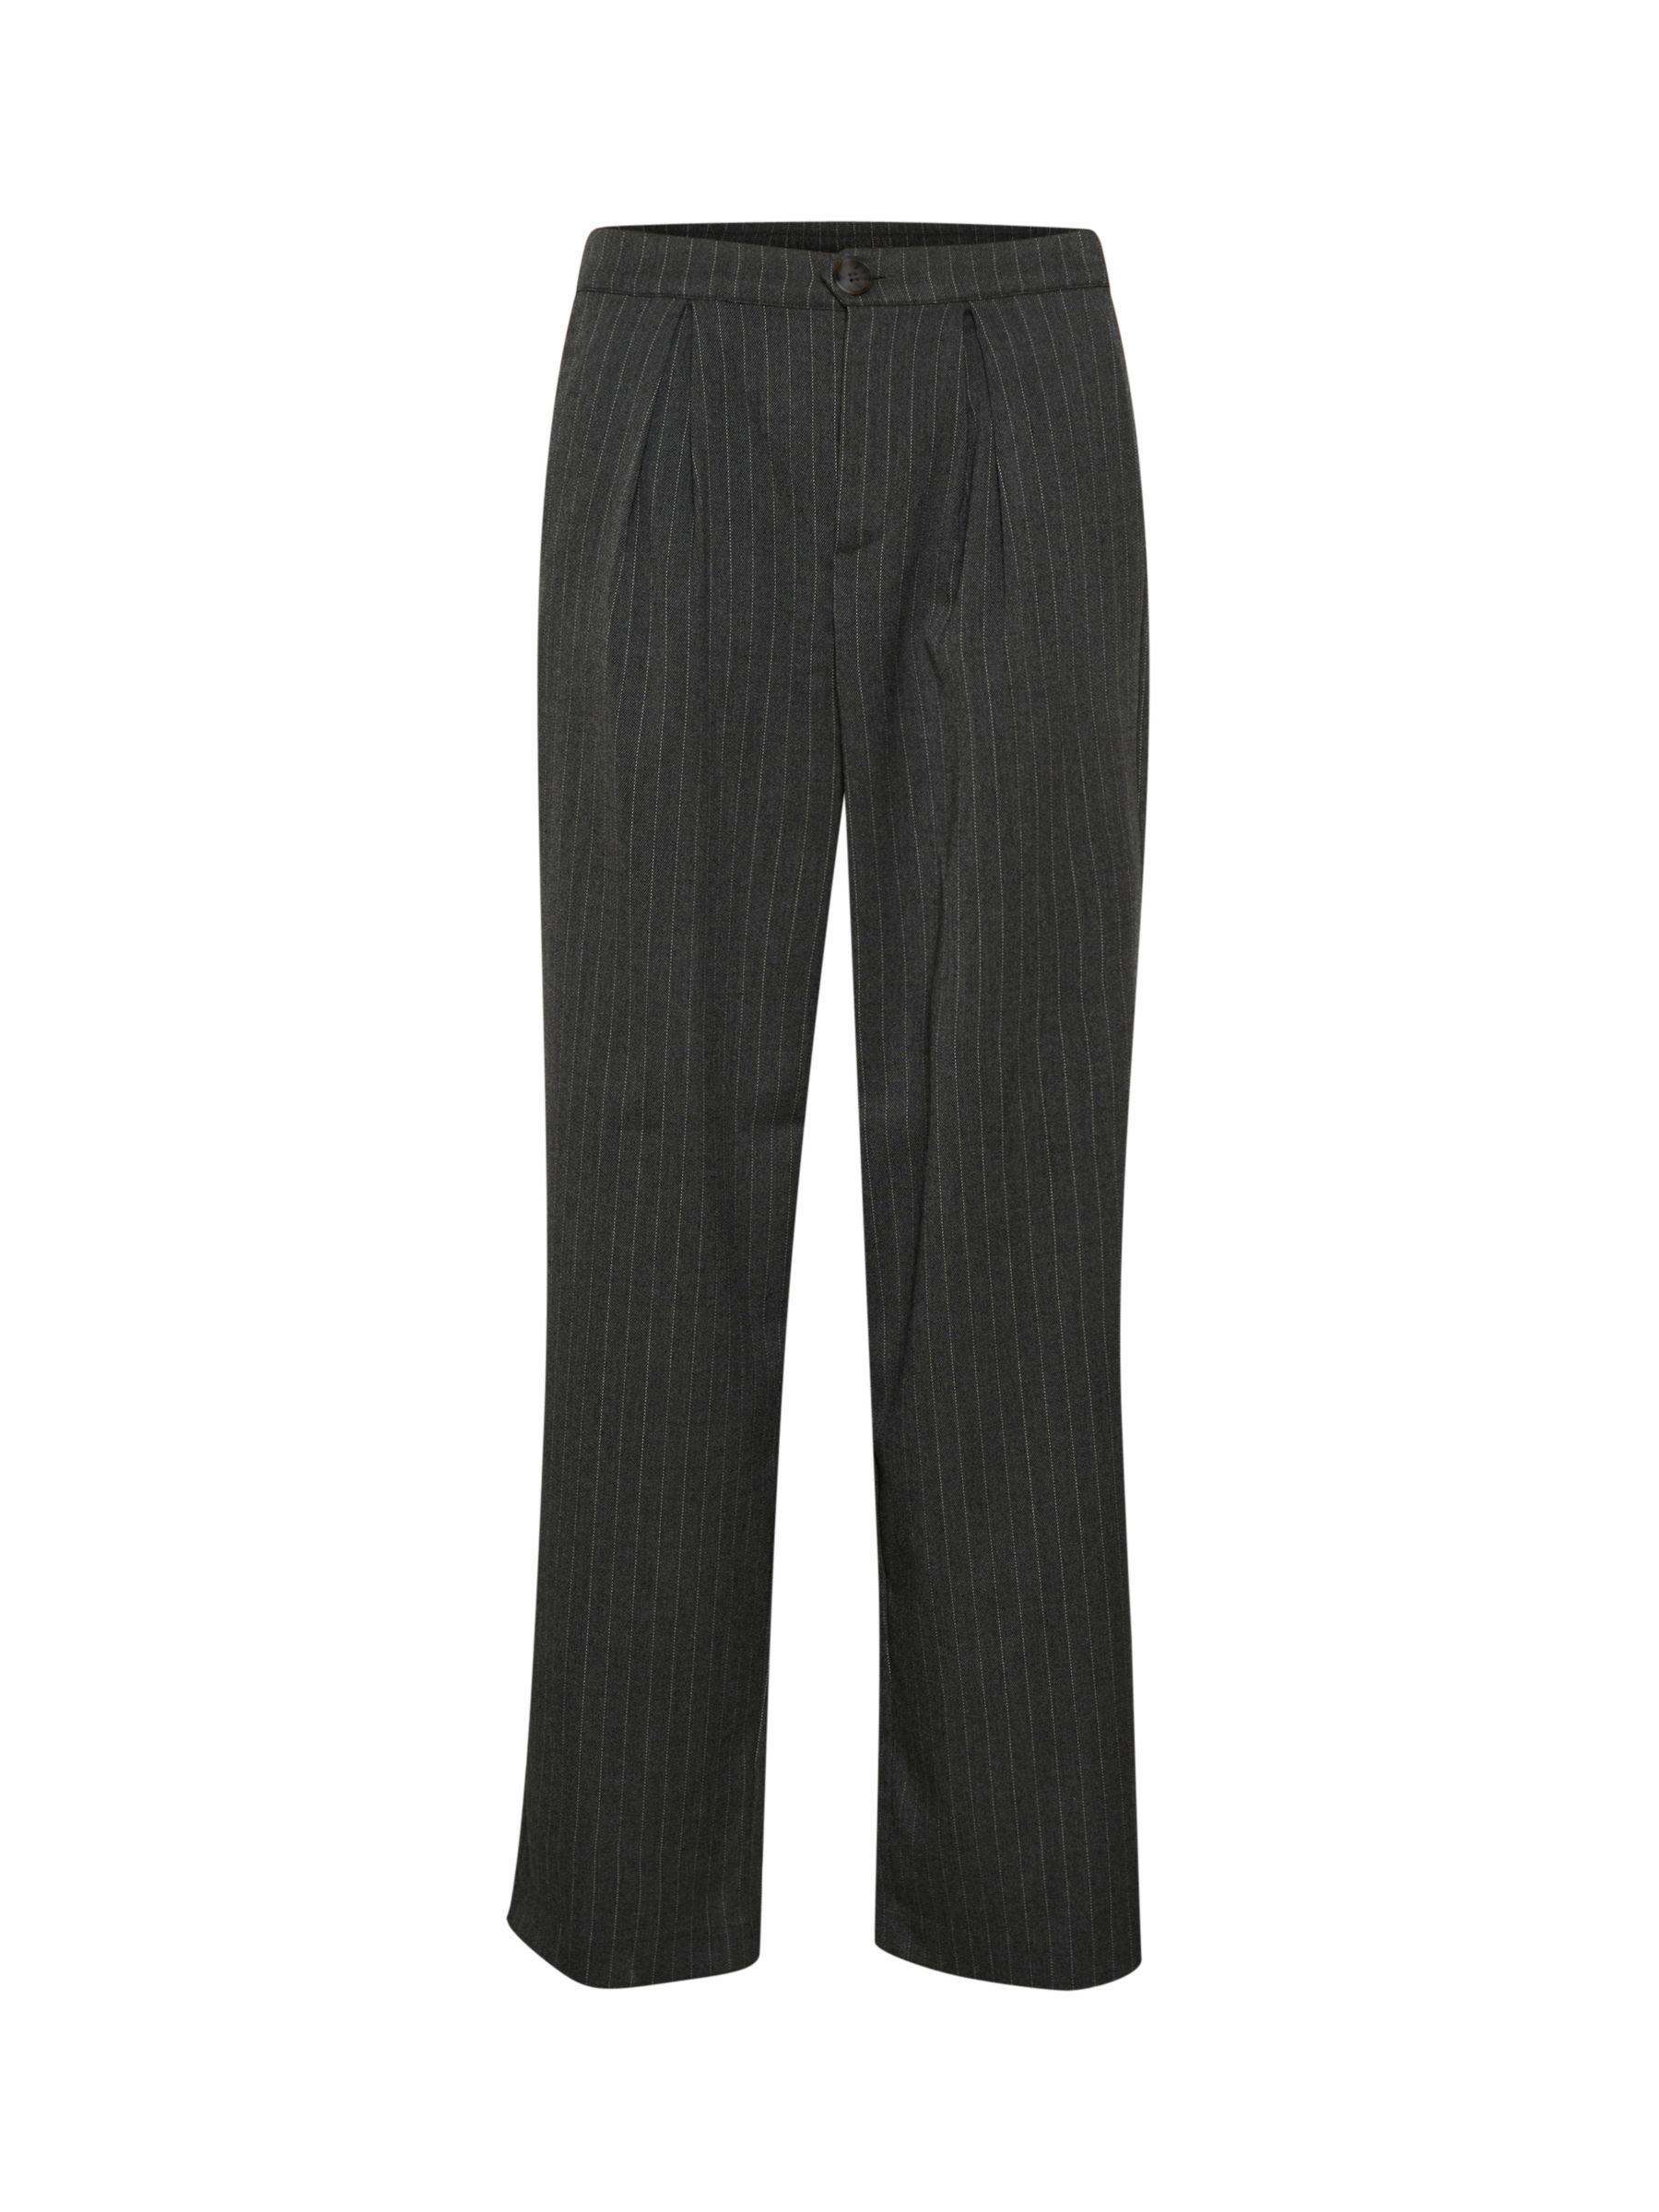 Buy Saint Tropez Xina Pinstripe Trousers, Forged Iron Online at johnlewis.com